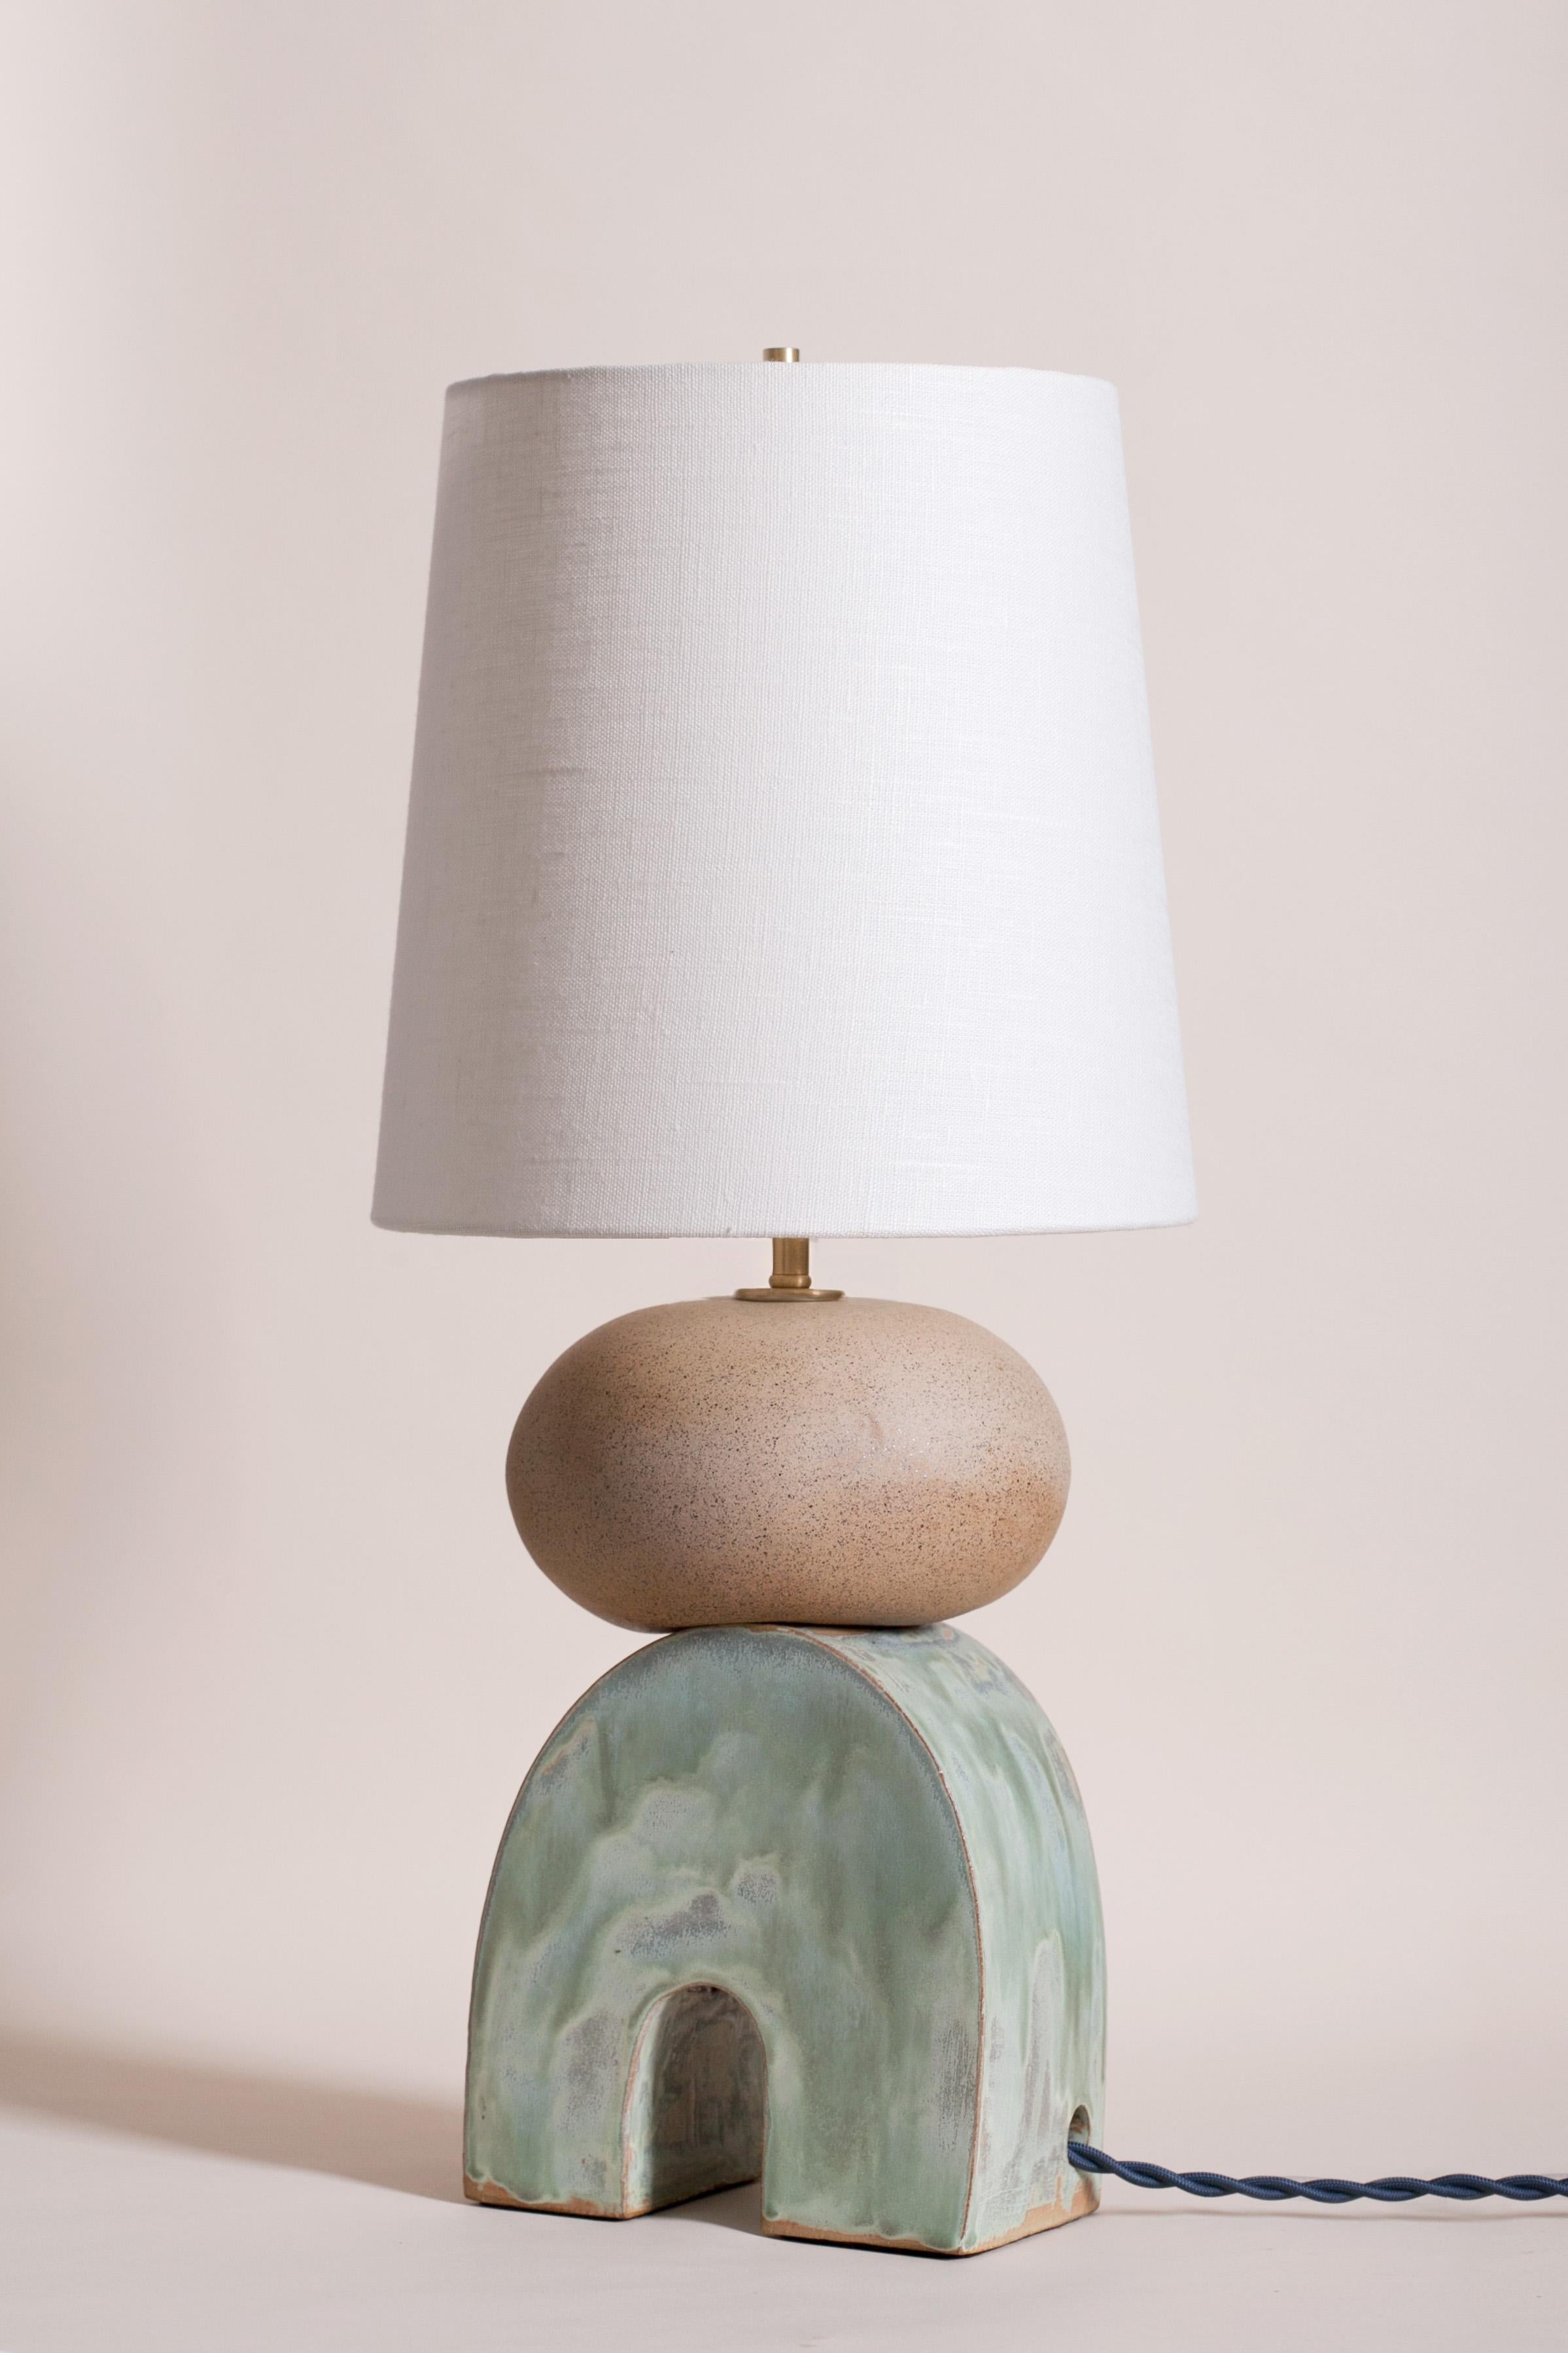 handmade pottery table lamps